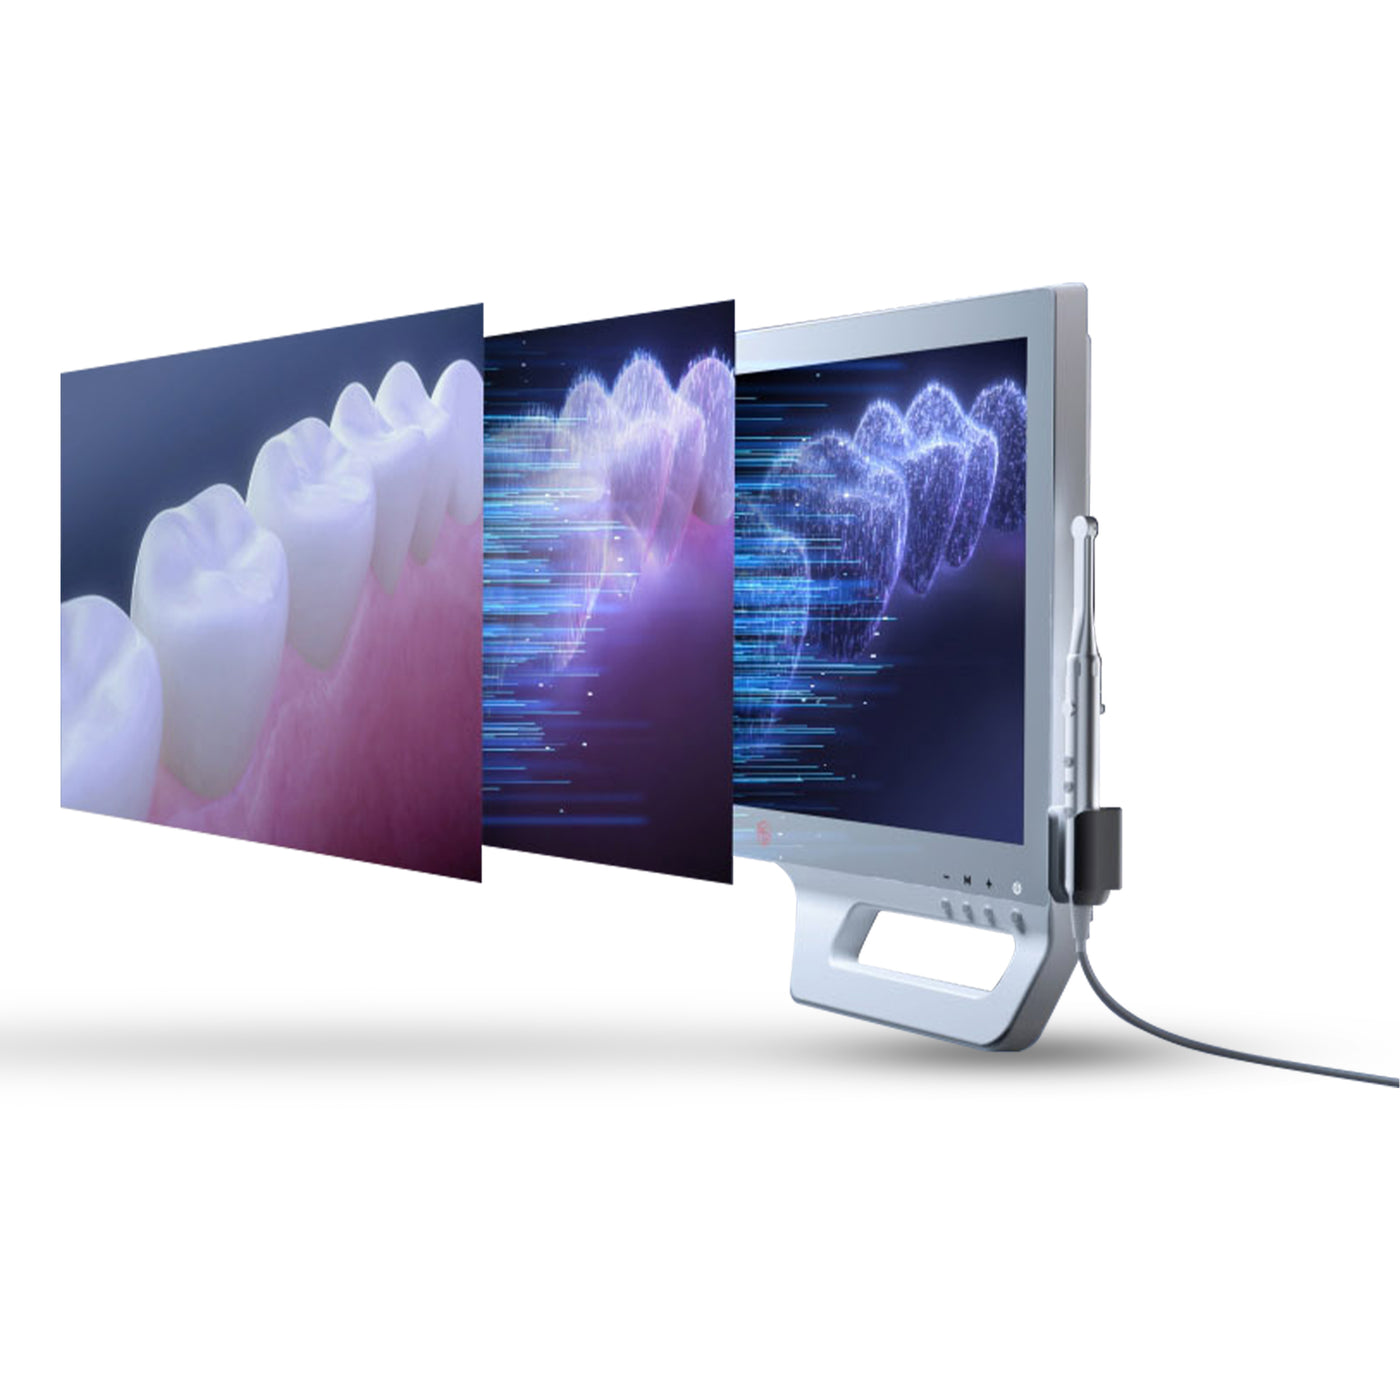 A digital display screen shows a dental image of teeth captured using the Intraoral Camera KP Cam-one by VSDent. The image is segmented into different layers, depicting various analytical stages, including a tooth projection, data visualization, and a graphical representation of dental diagnostics. (8951571841334)